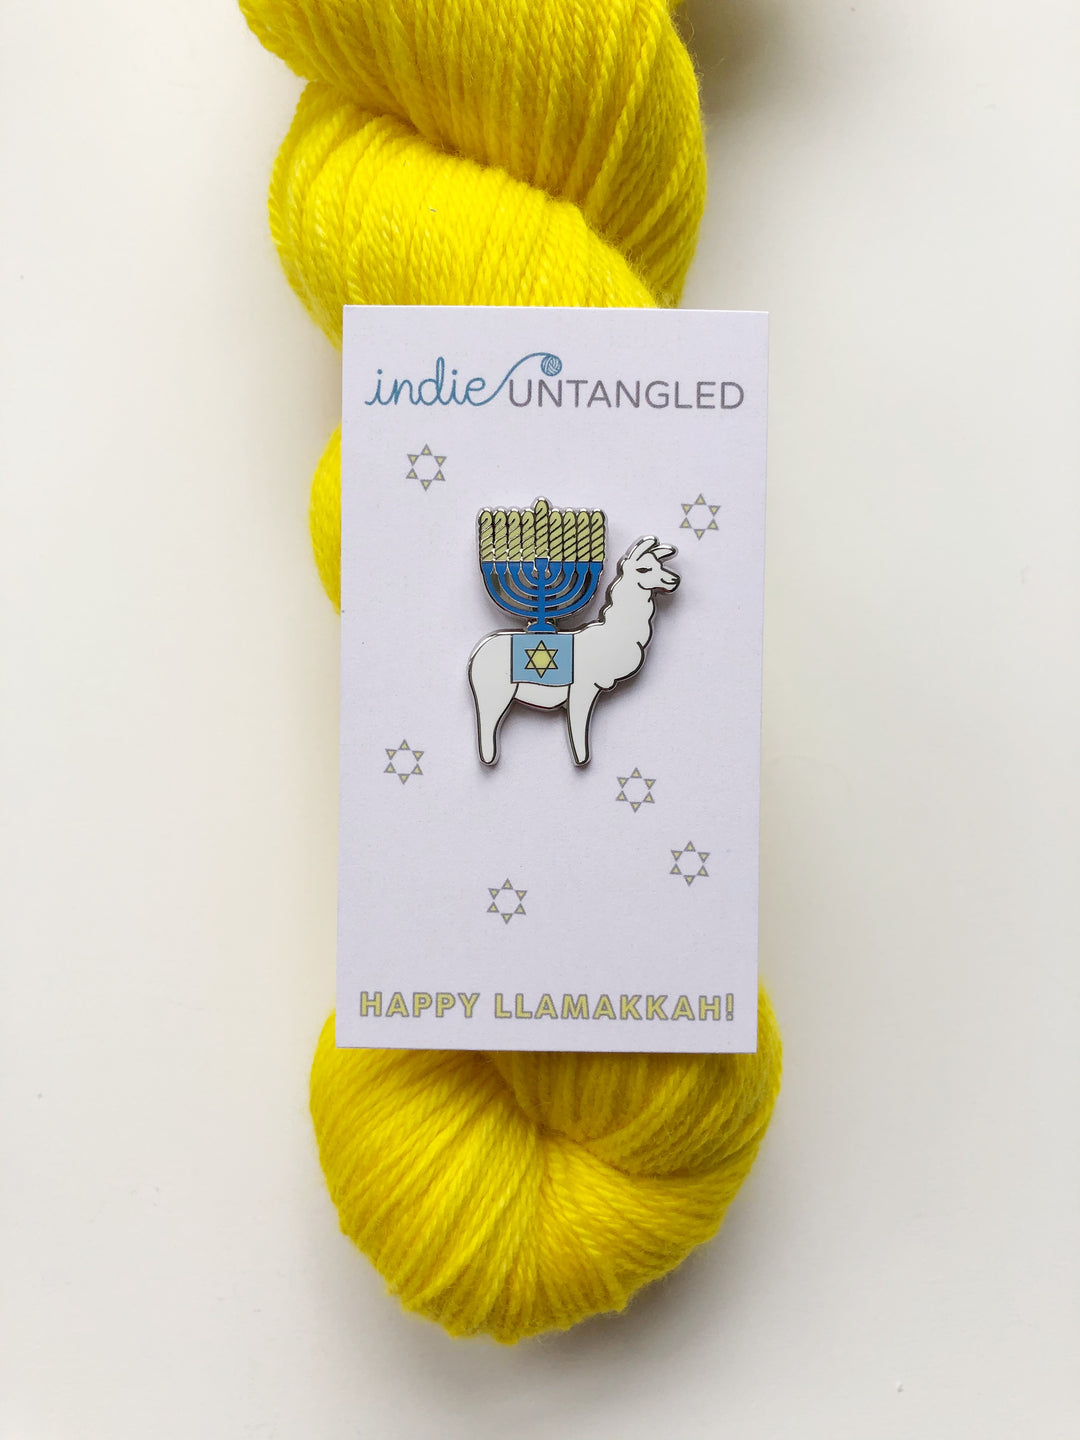 An enamel pin of a white llama with a blue and yellow menorah on its back on a skein of yellow yarn.  